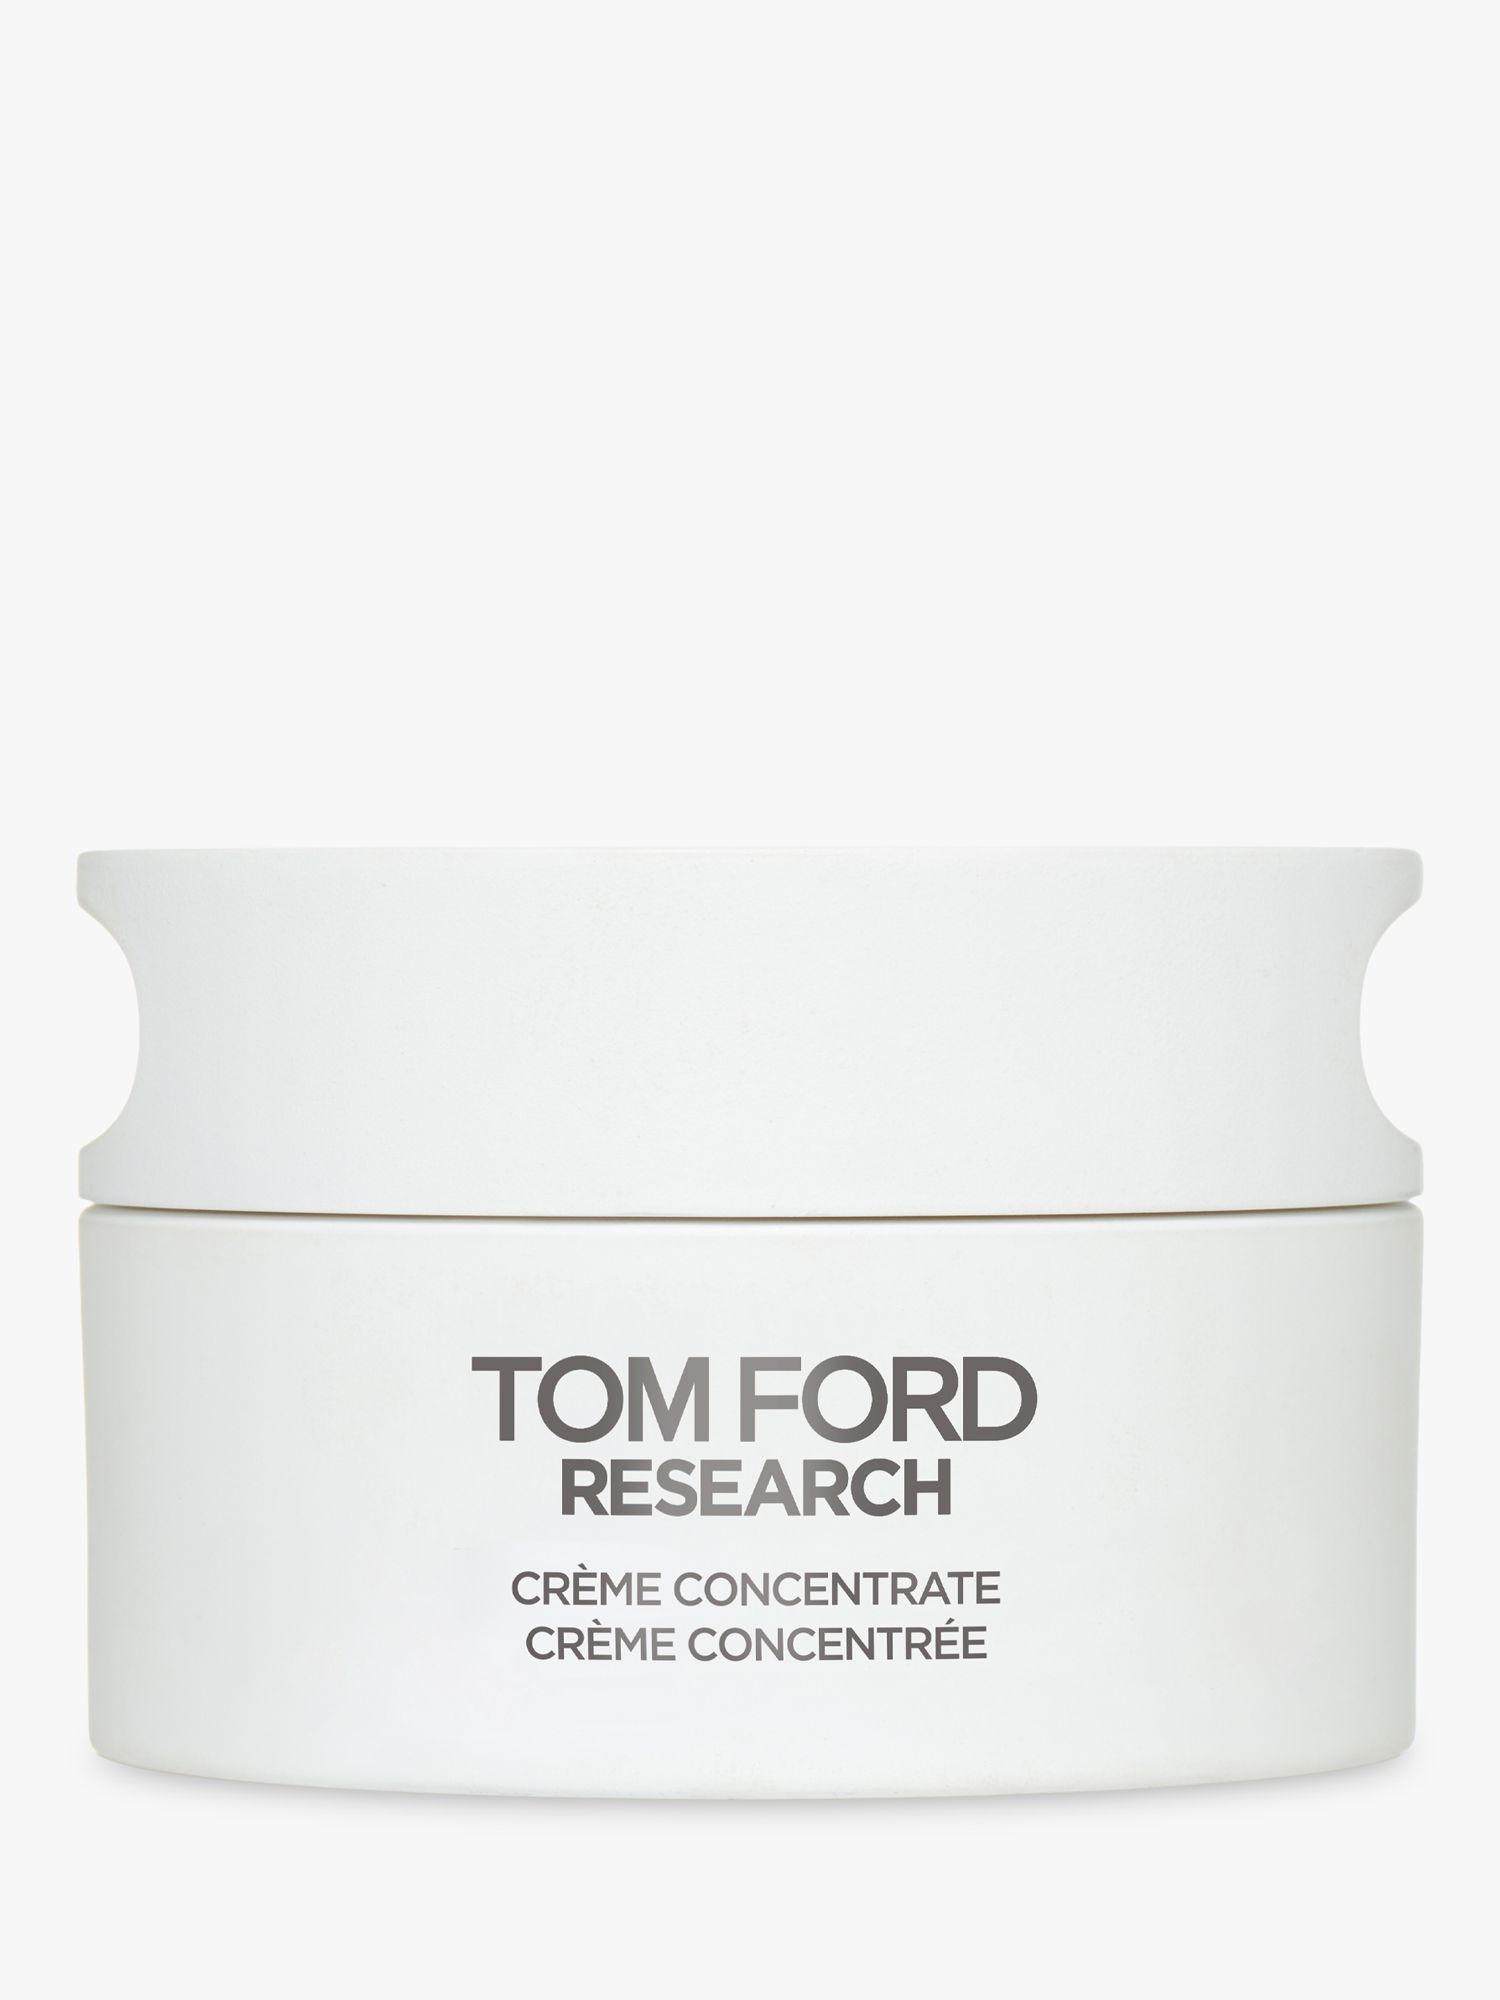 TOM FORD Research Crème Concentrate, 50ml 1